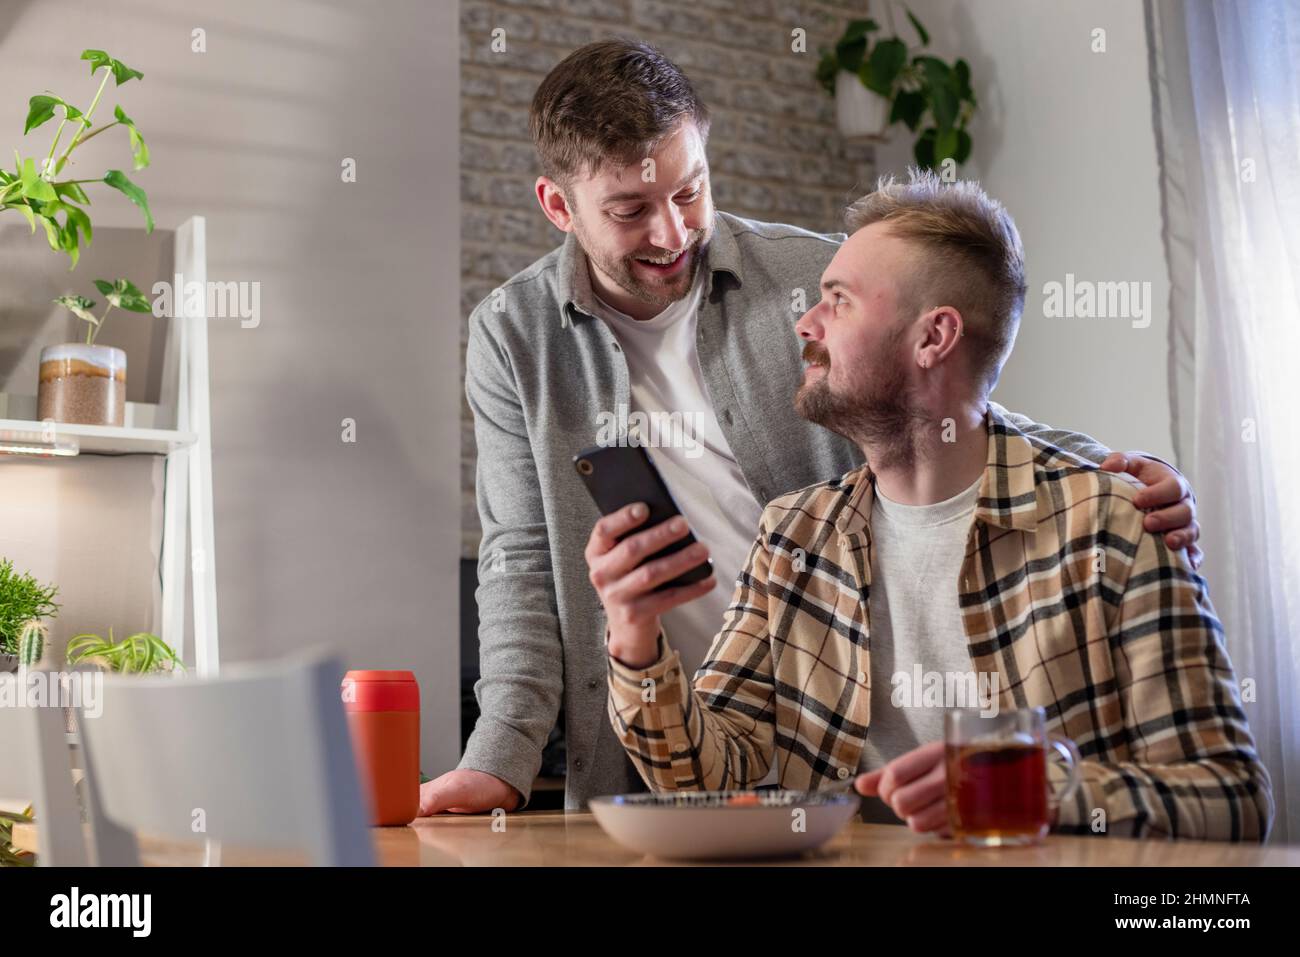 An LGBTQI same sex male couple sitting at a table in their living room relaxing, one man is using his smart phone and he has a plate of pasta. Stock Photo